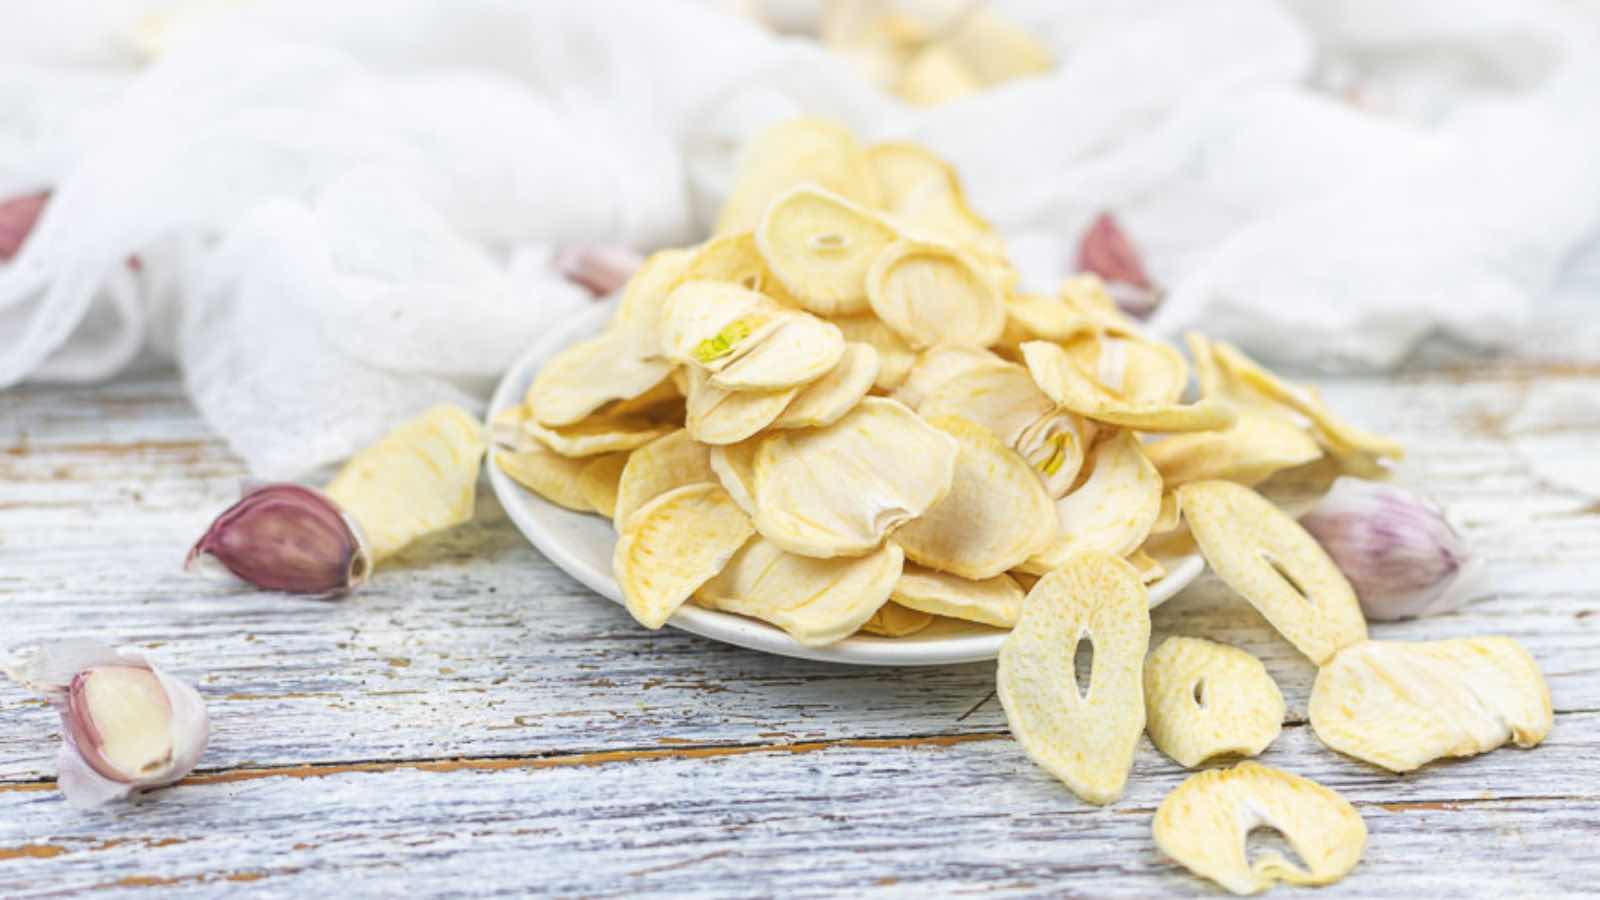 Garlic chips in a bowl on a wooden table.